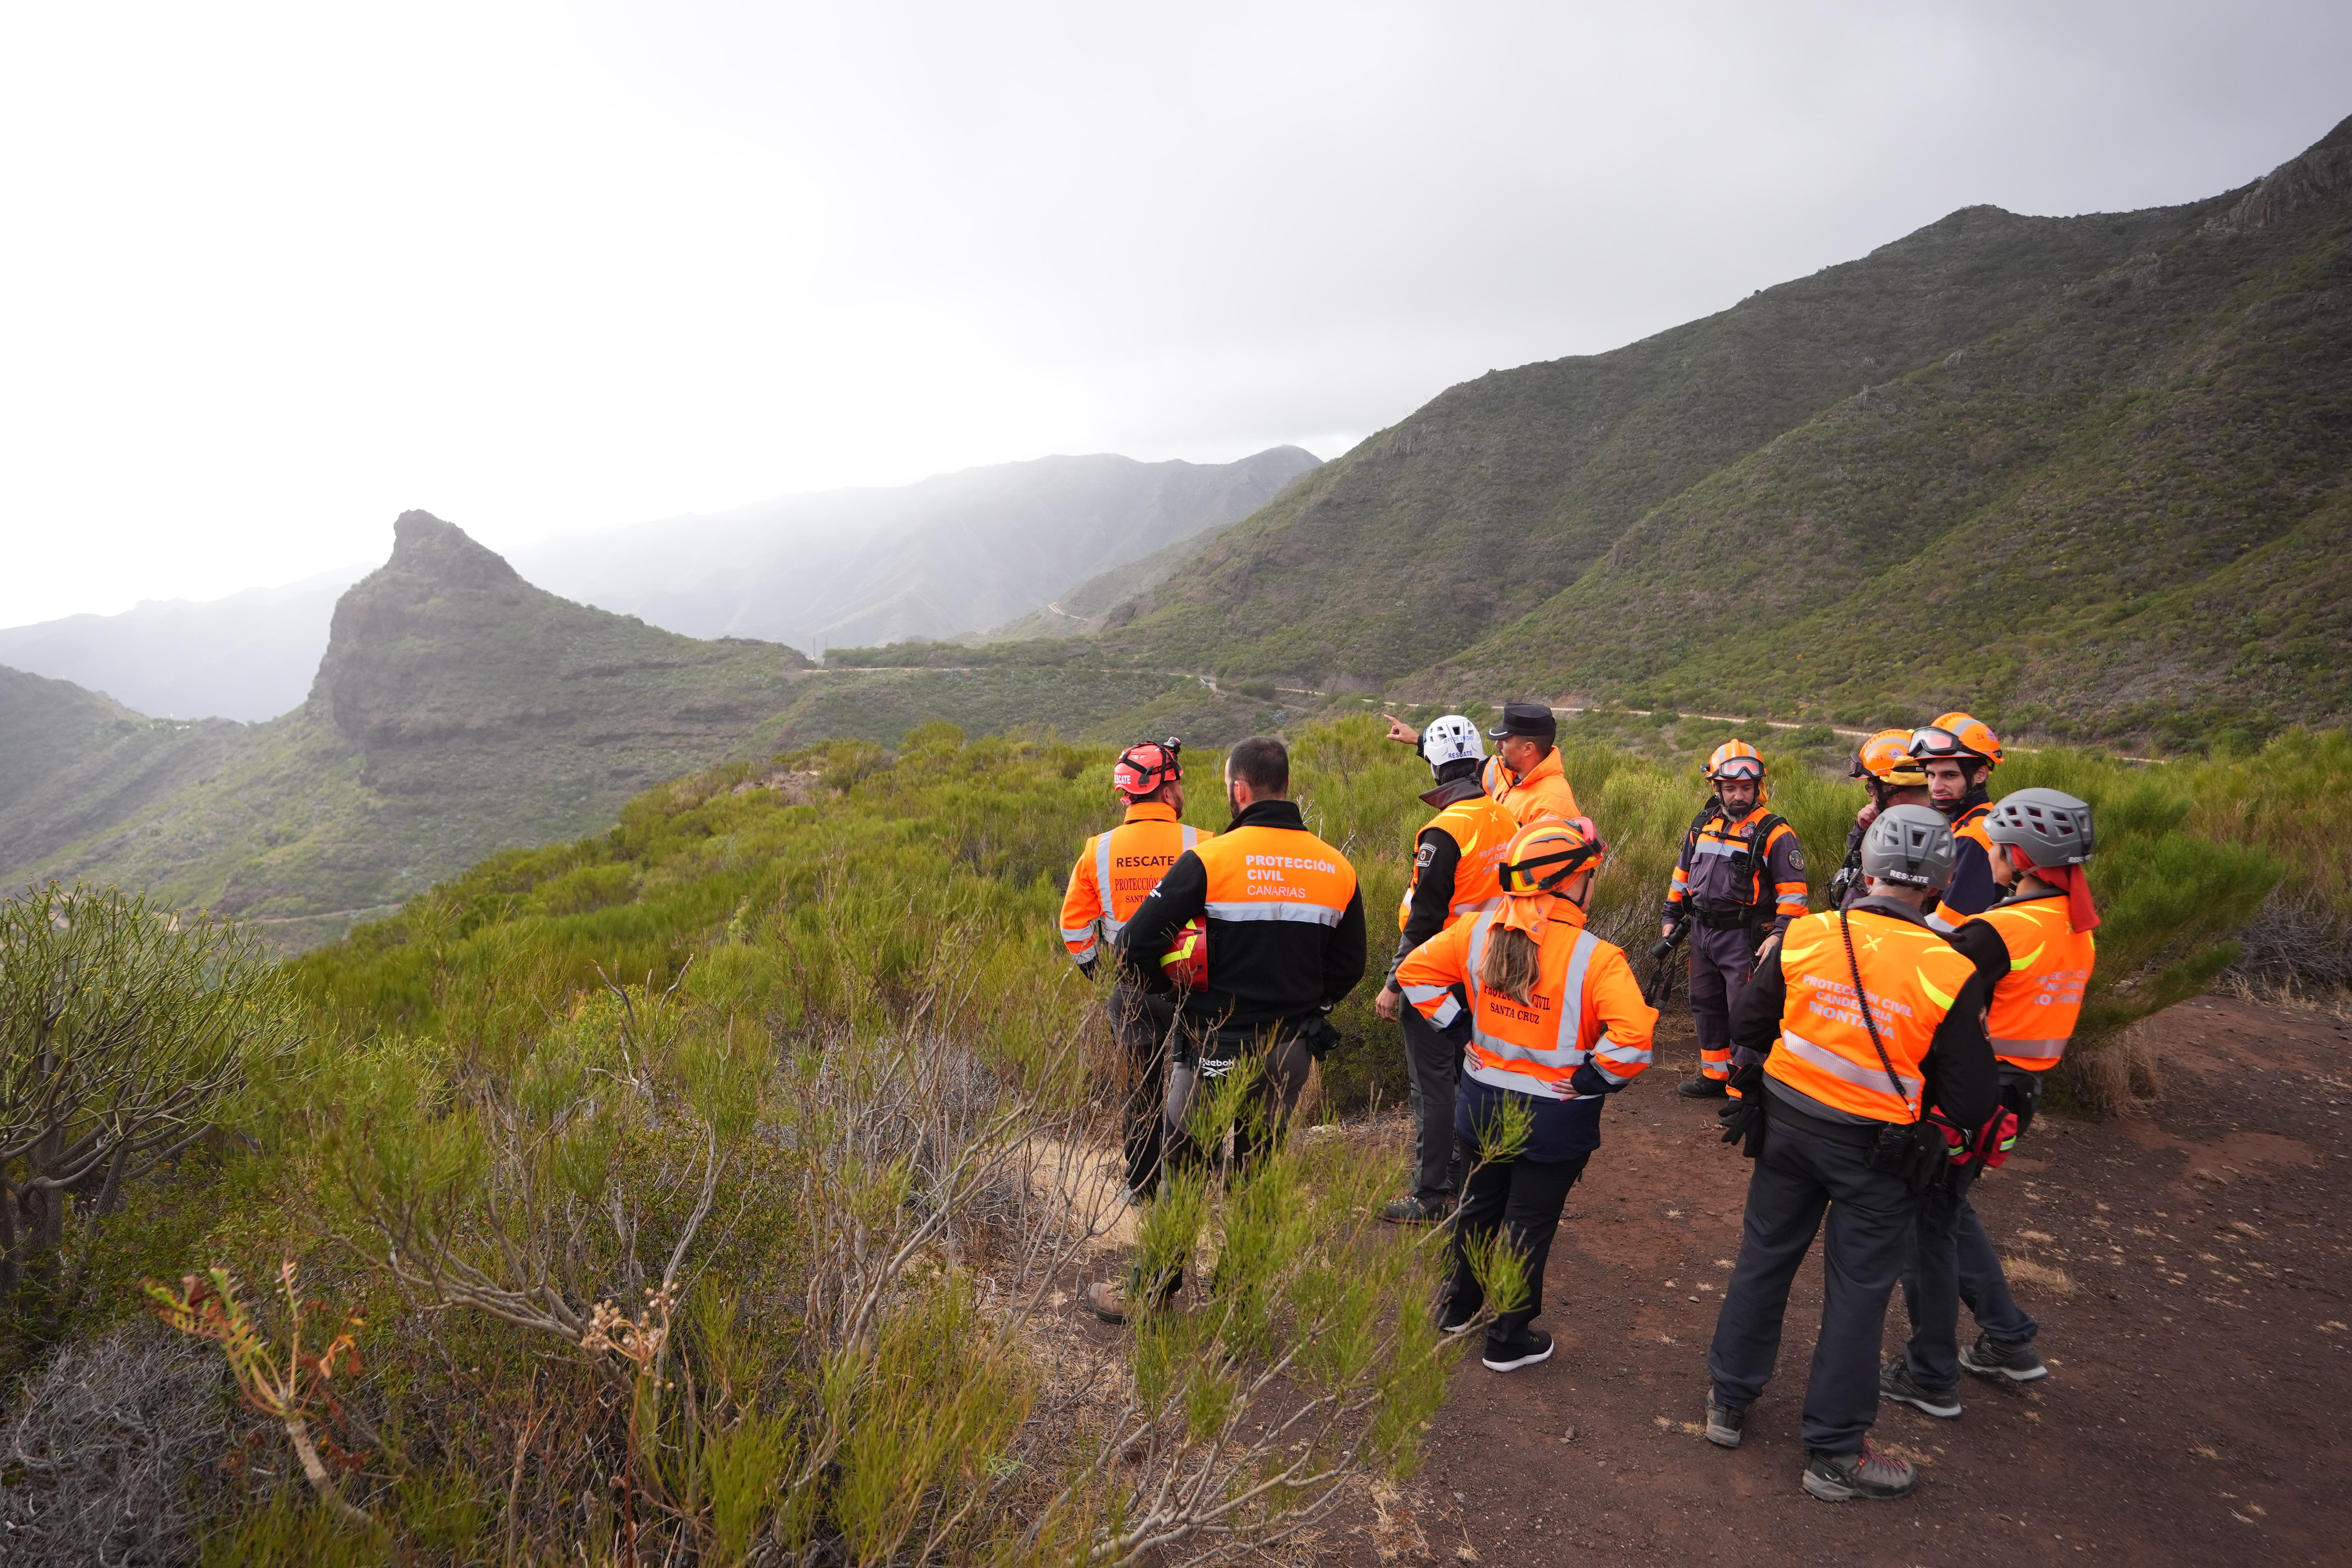 A group of search and rescue workers near to the village of Masca, Tenerife (James Manning/PA)